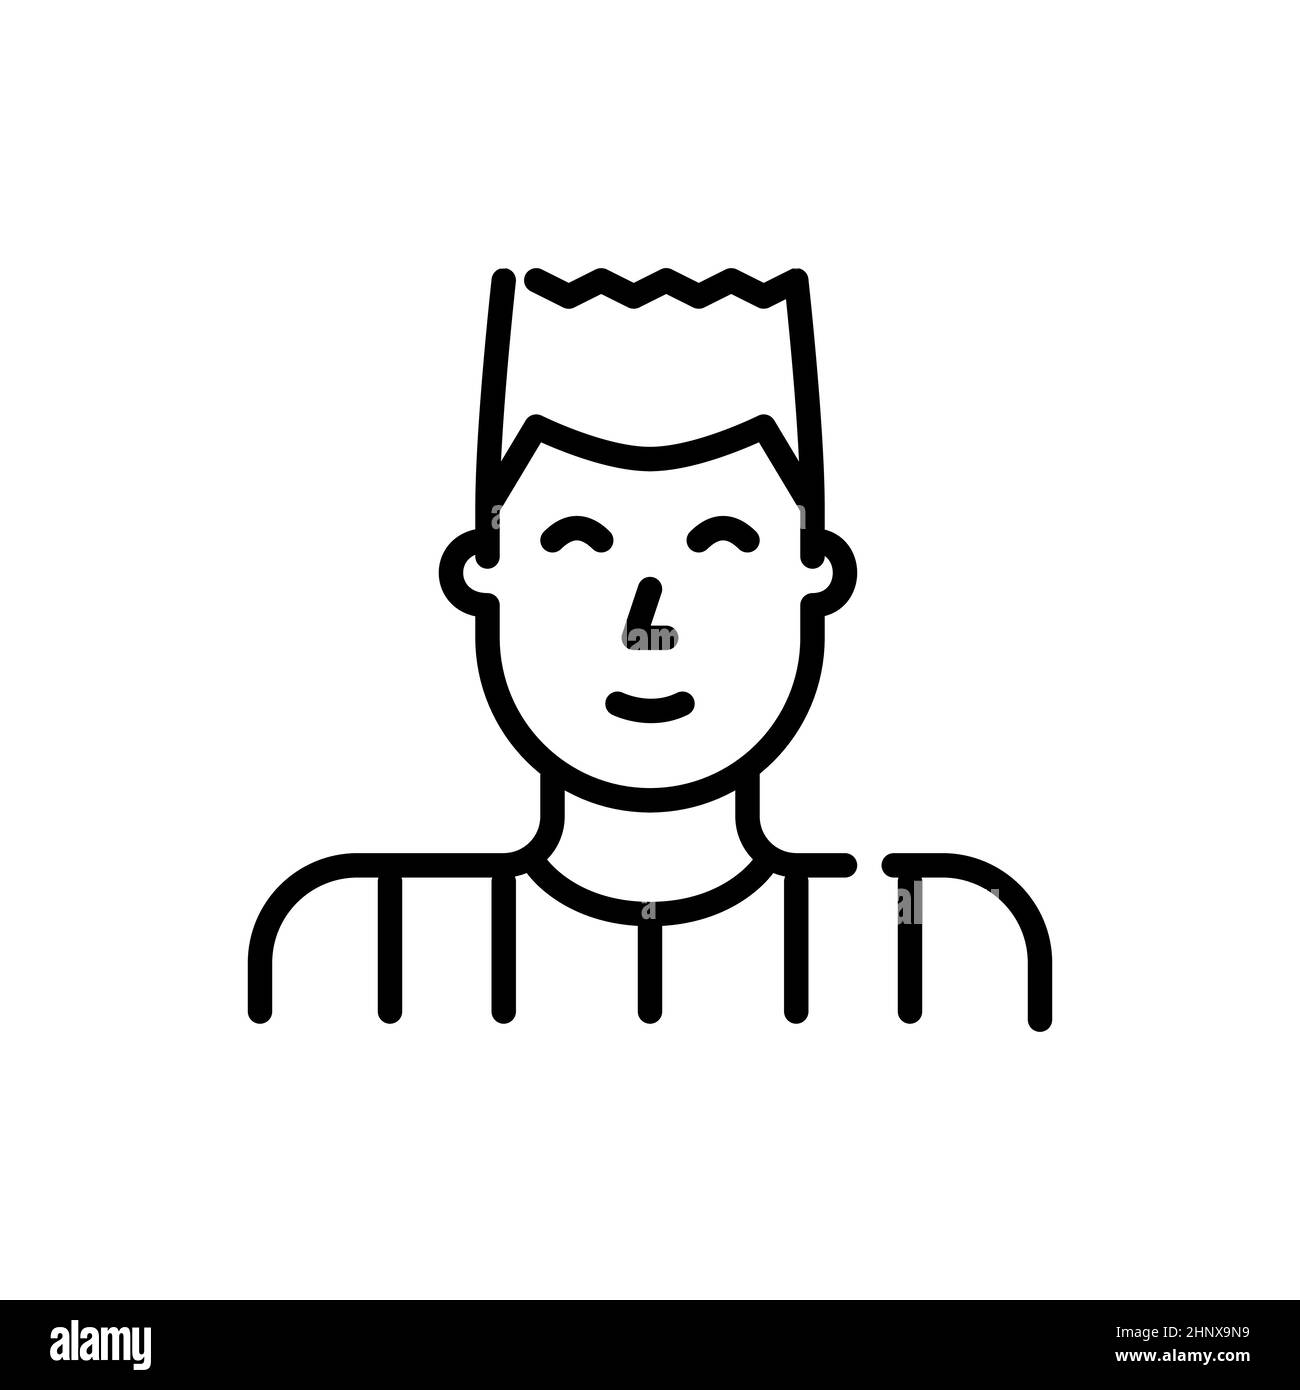 Male avatar profile picture icon Black and White Stock Photos & Images ...